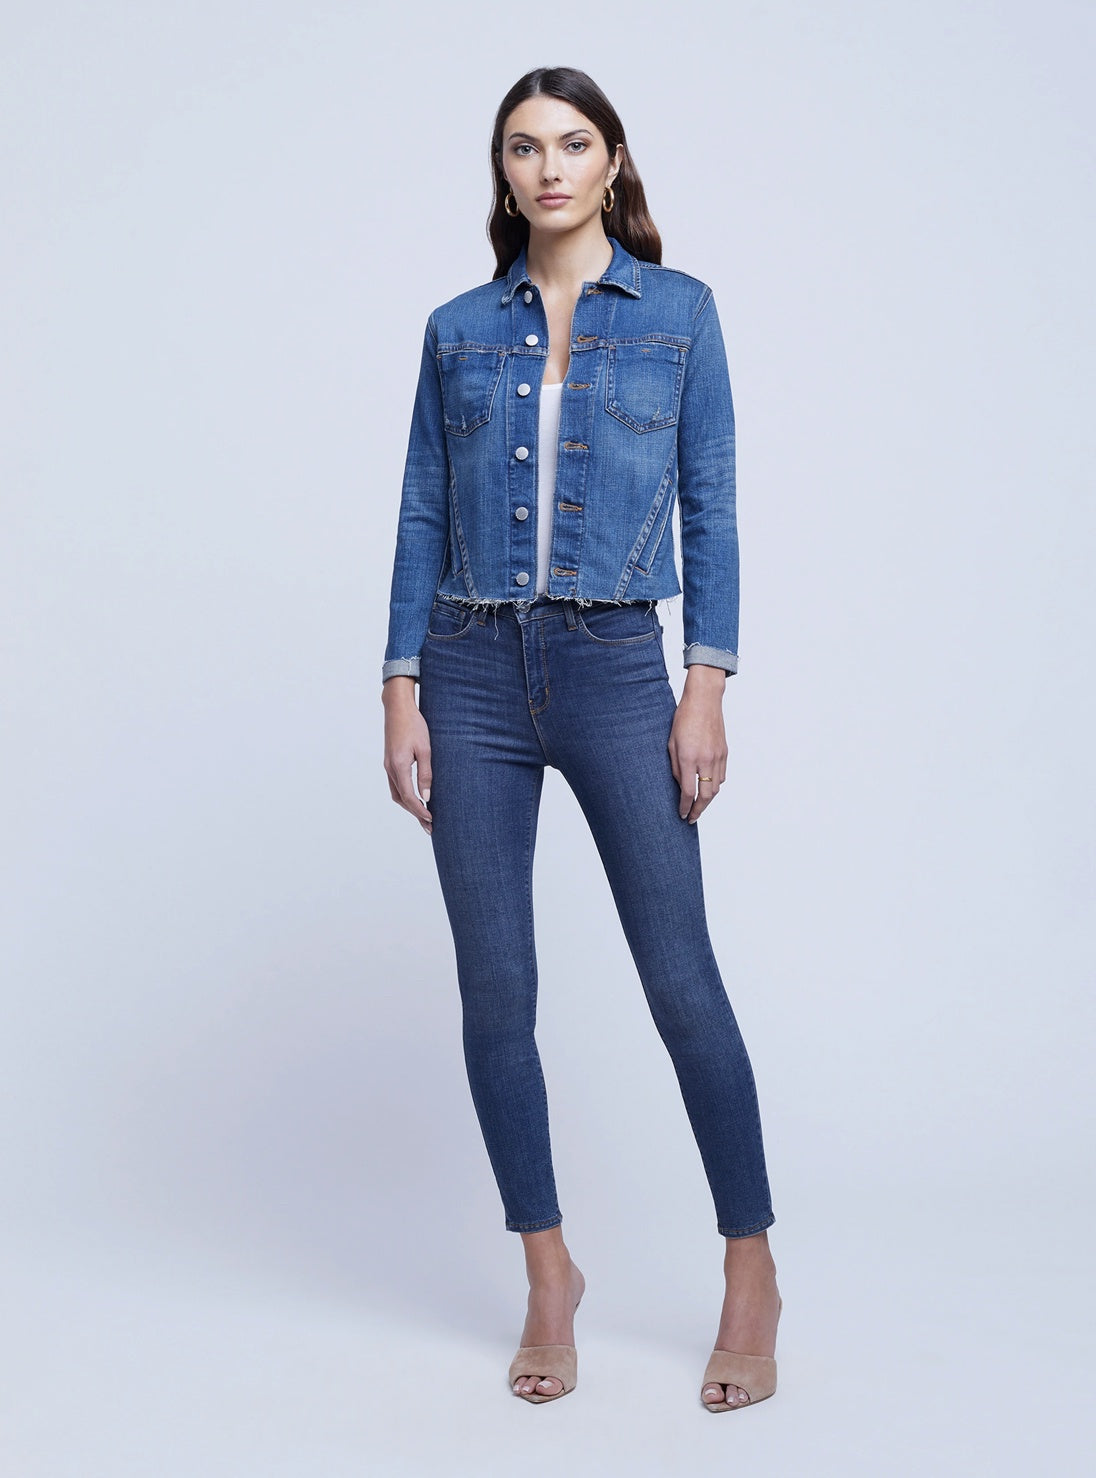 L'AGENCE Janelle Slim Raw Jean Jacket in Authentique